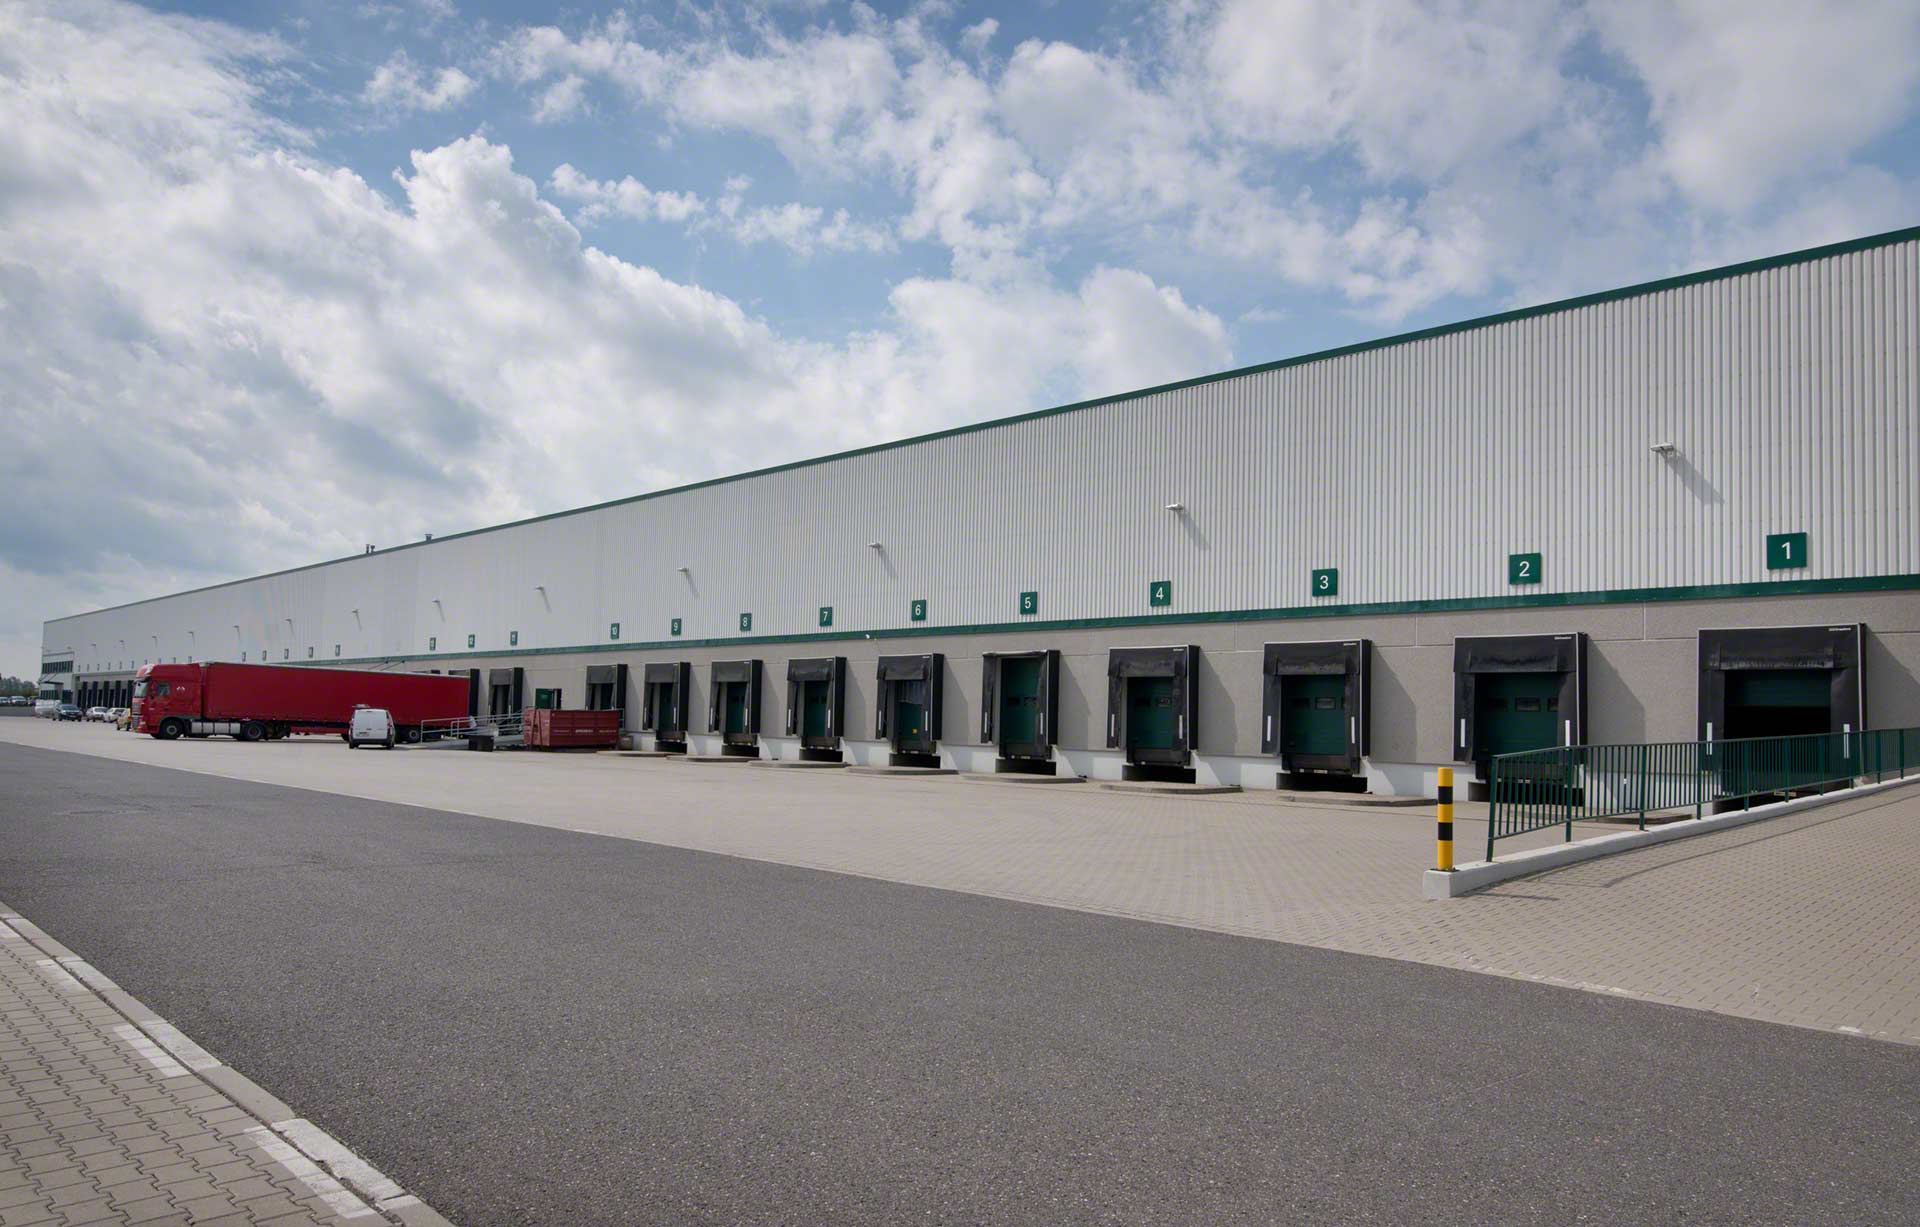 A distribution center is a logistics facility focused on goods receipt and dispatch processes